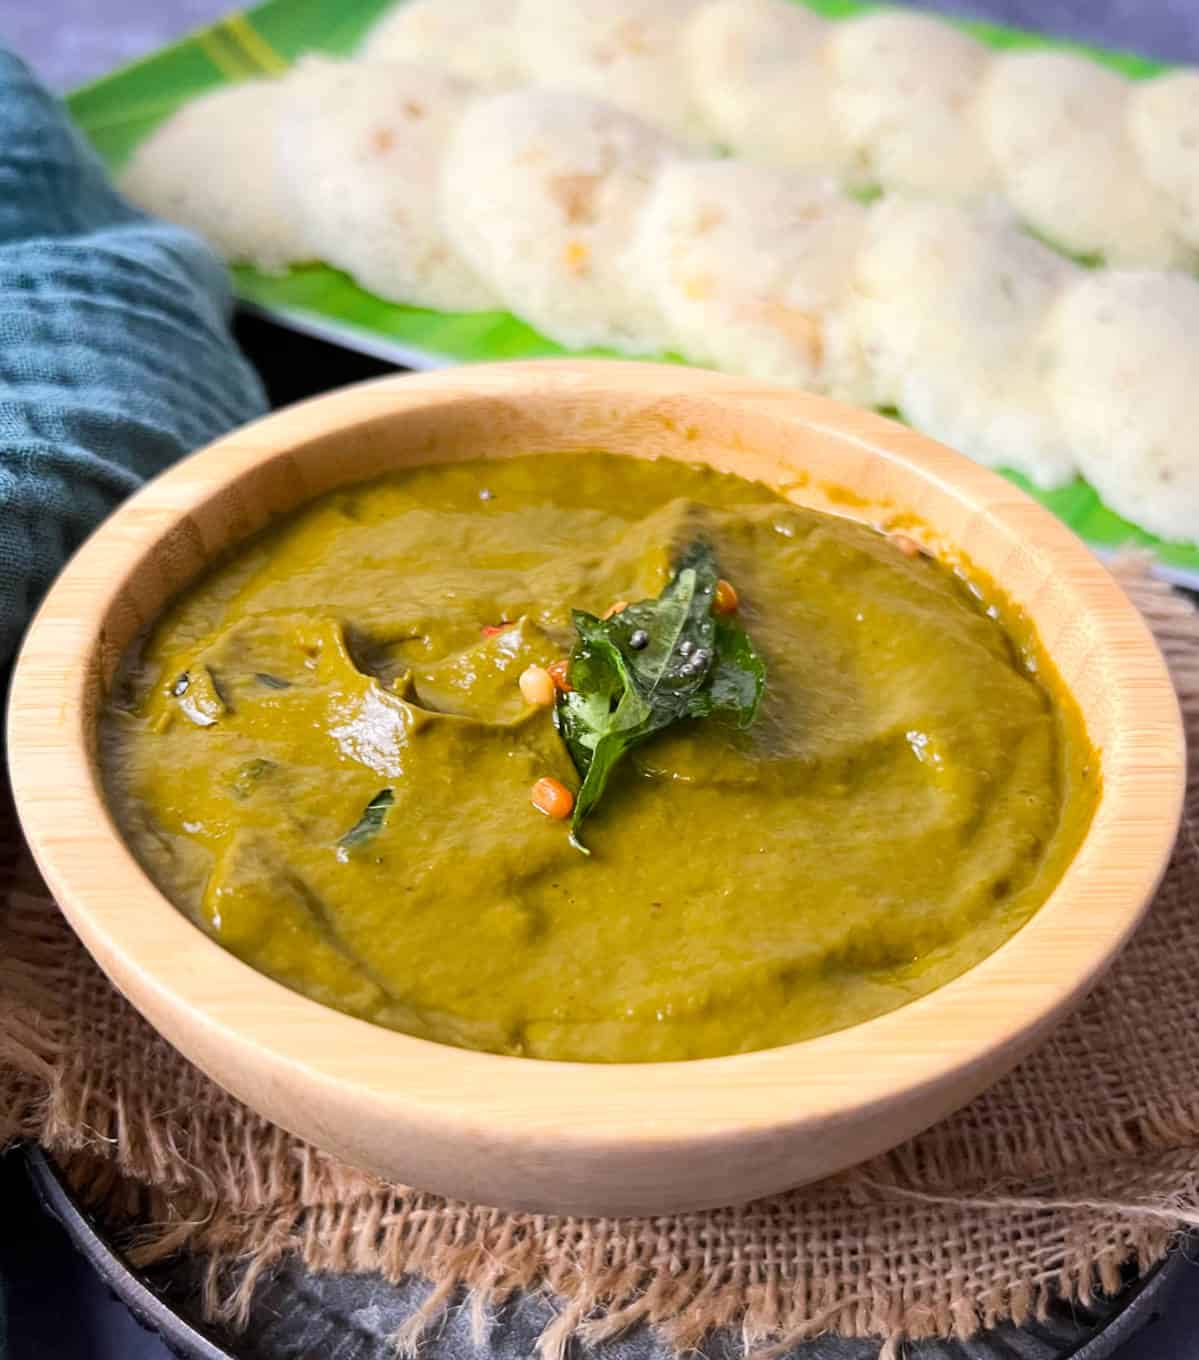 Malabar spinach chutney served in a bowl with rava idli in the background.